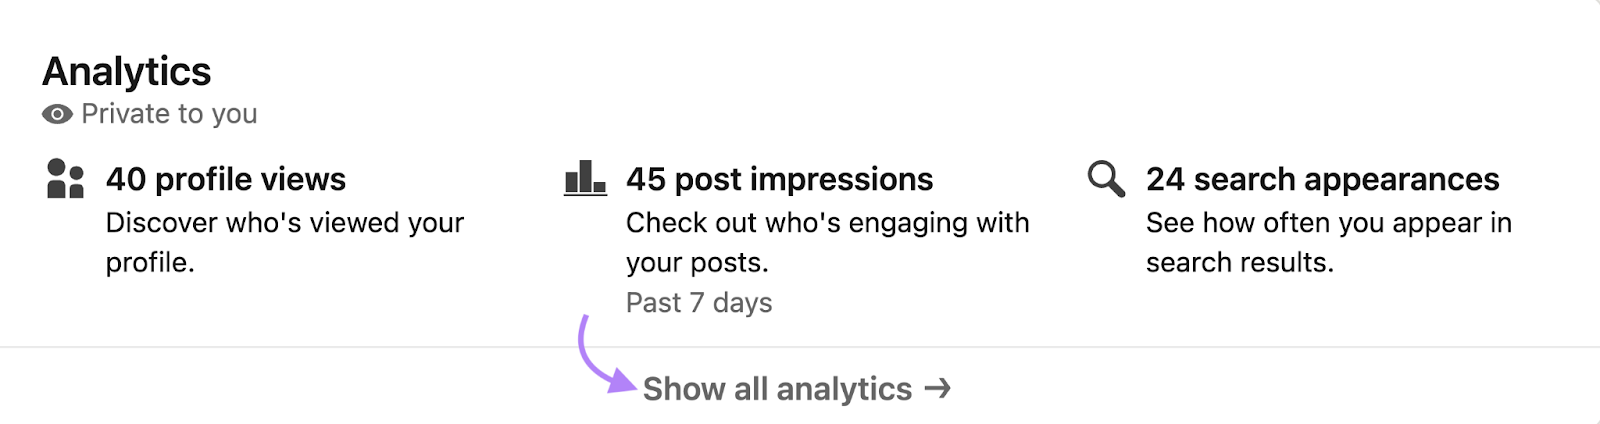 "Show all analytics" button highlighted under "Analytics" section